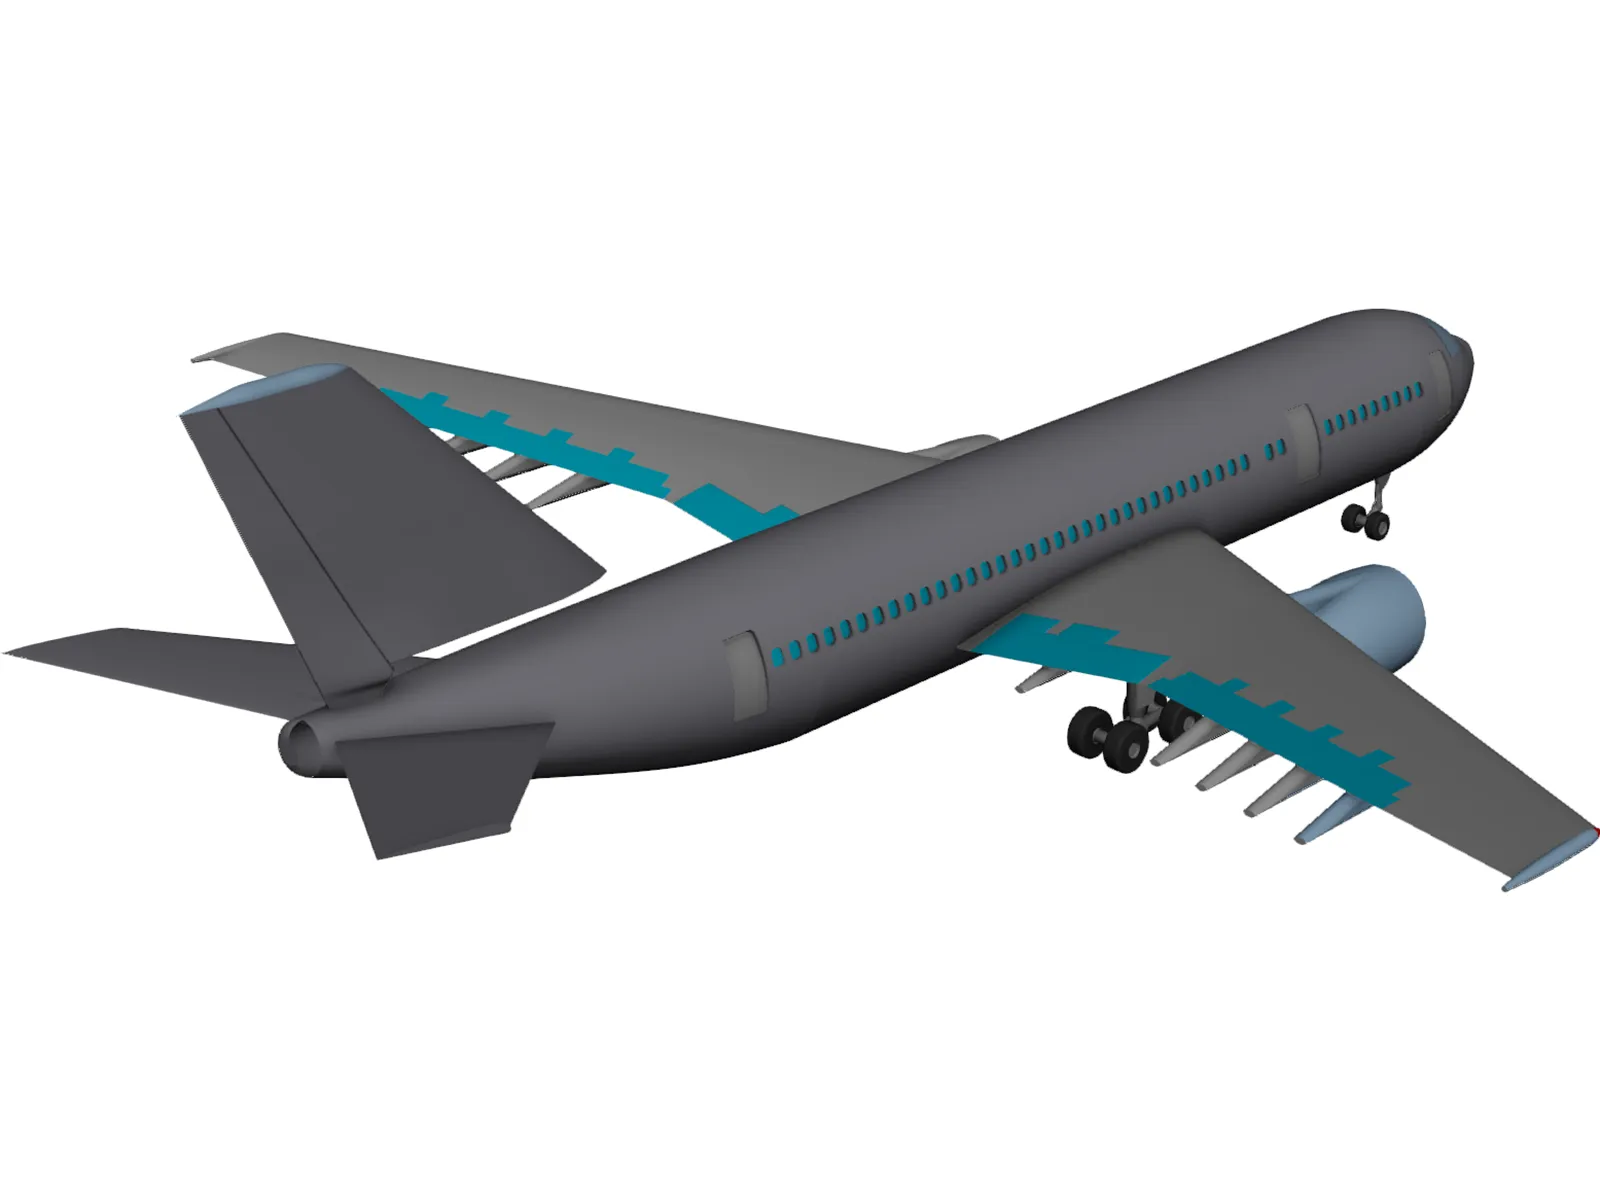 8,925 Airbus A300 300 Images, Stock Photos, 3D objects, & Vectors